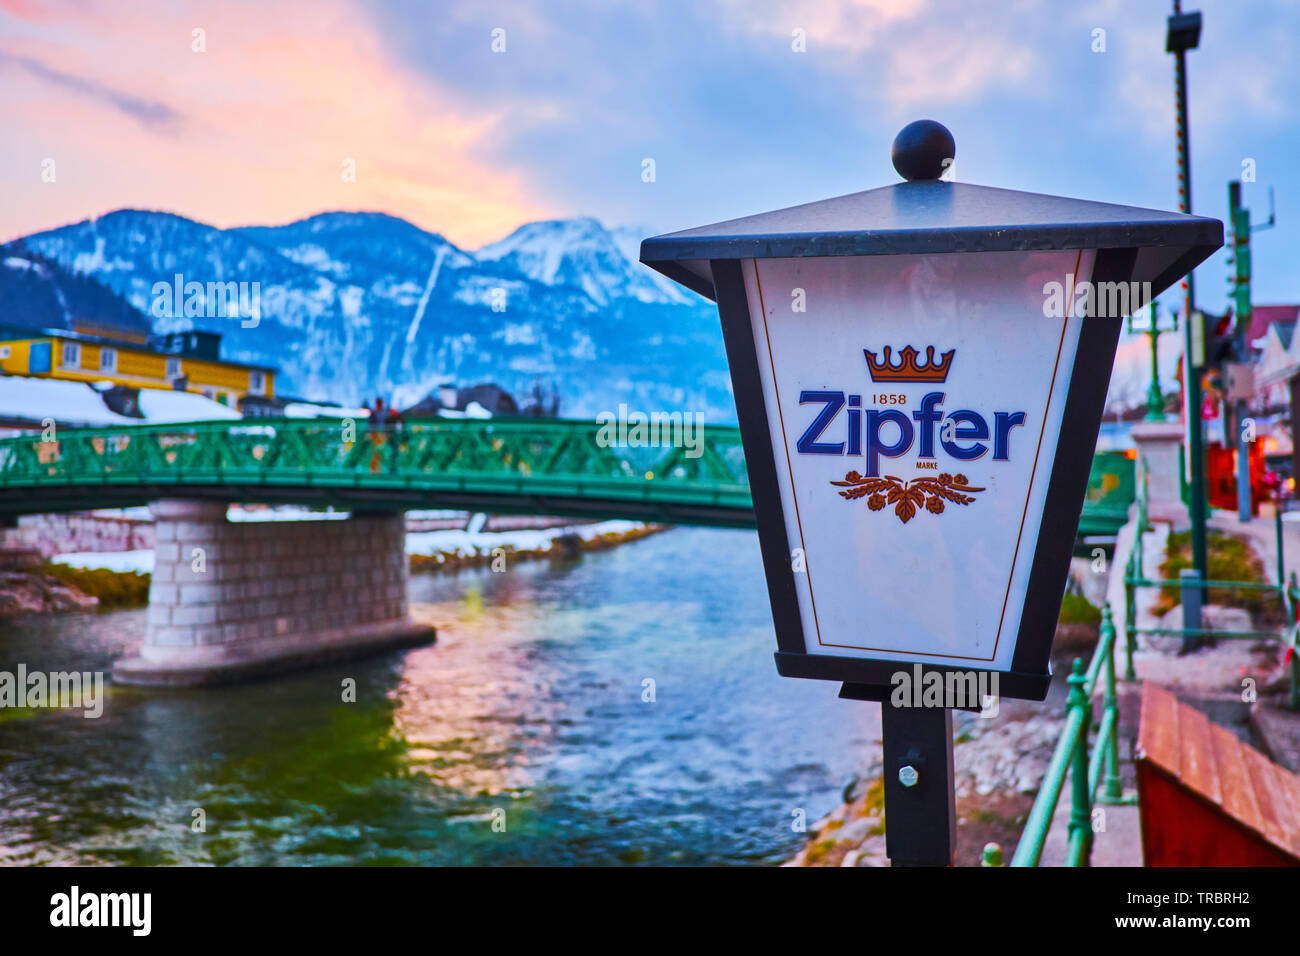 BAD ISCHL, AUSTRIA - FEBRUARY 20, 2019: The vintage lantern of Zipfer beer at the Elizabeth bridge across the Traun river in old town, on February 20 Stock Photo